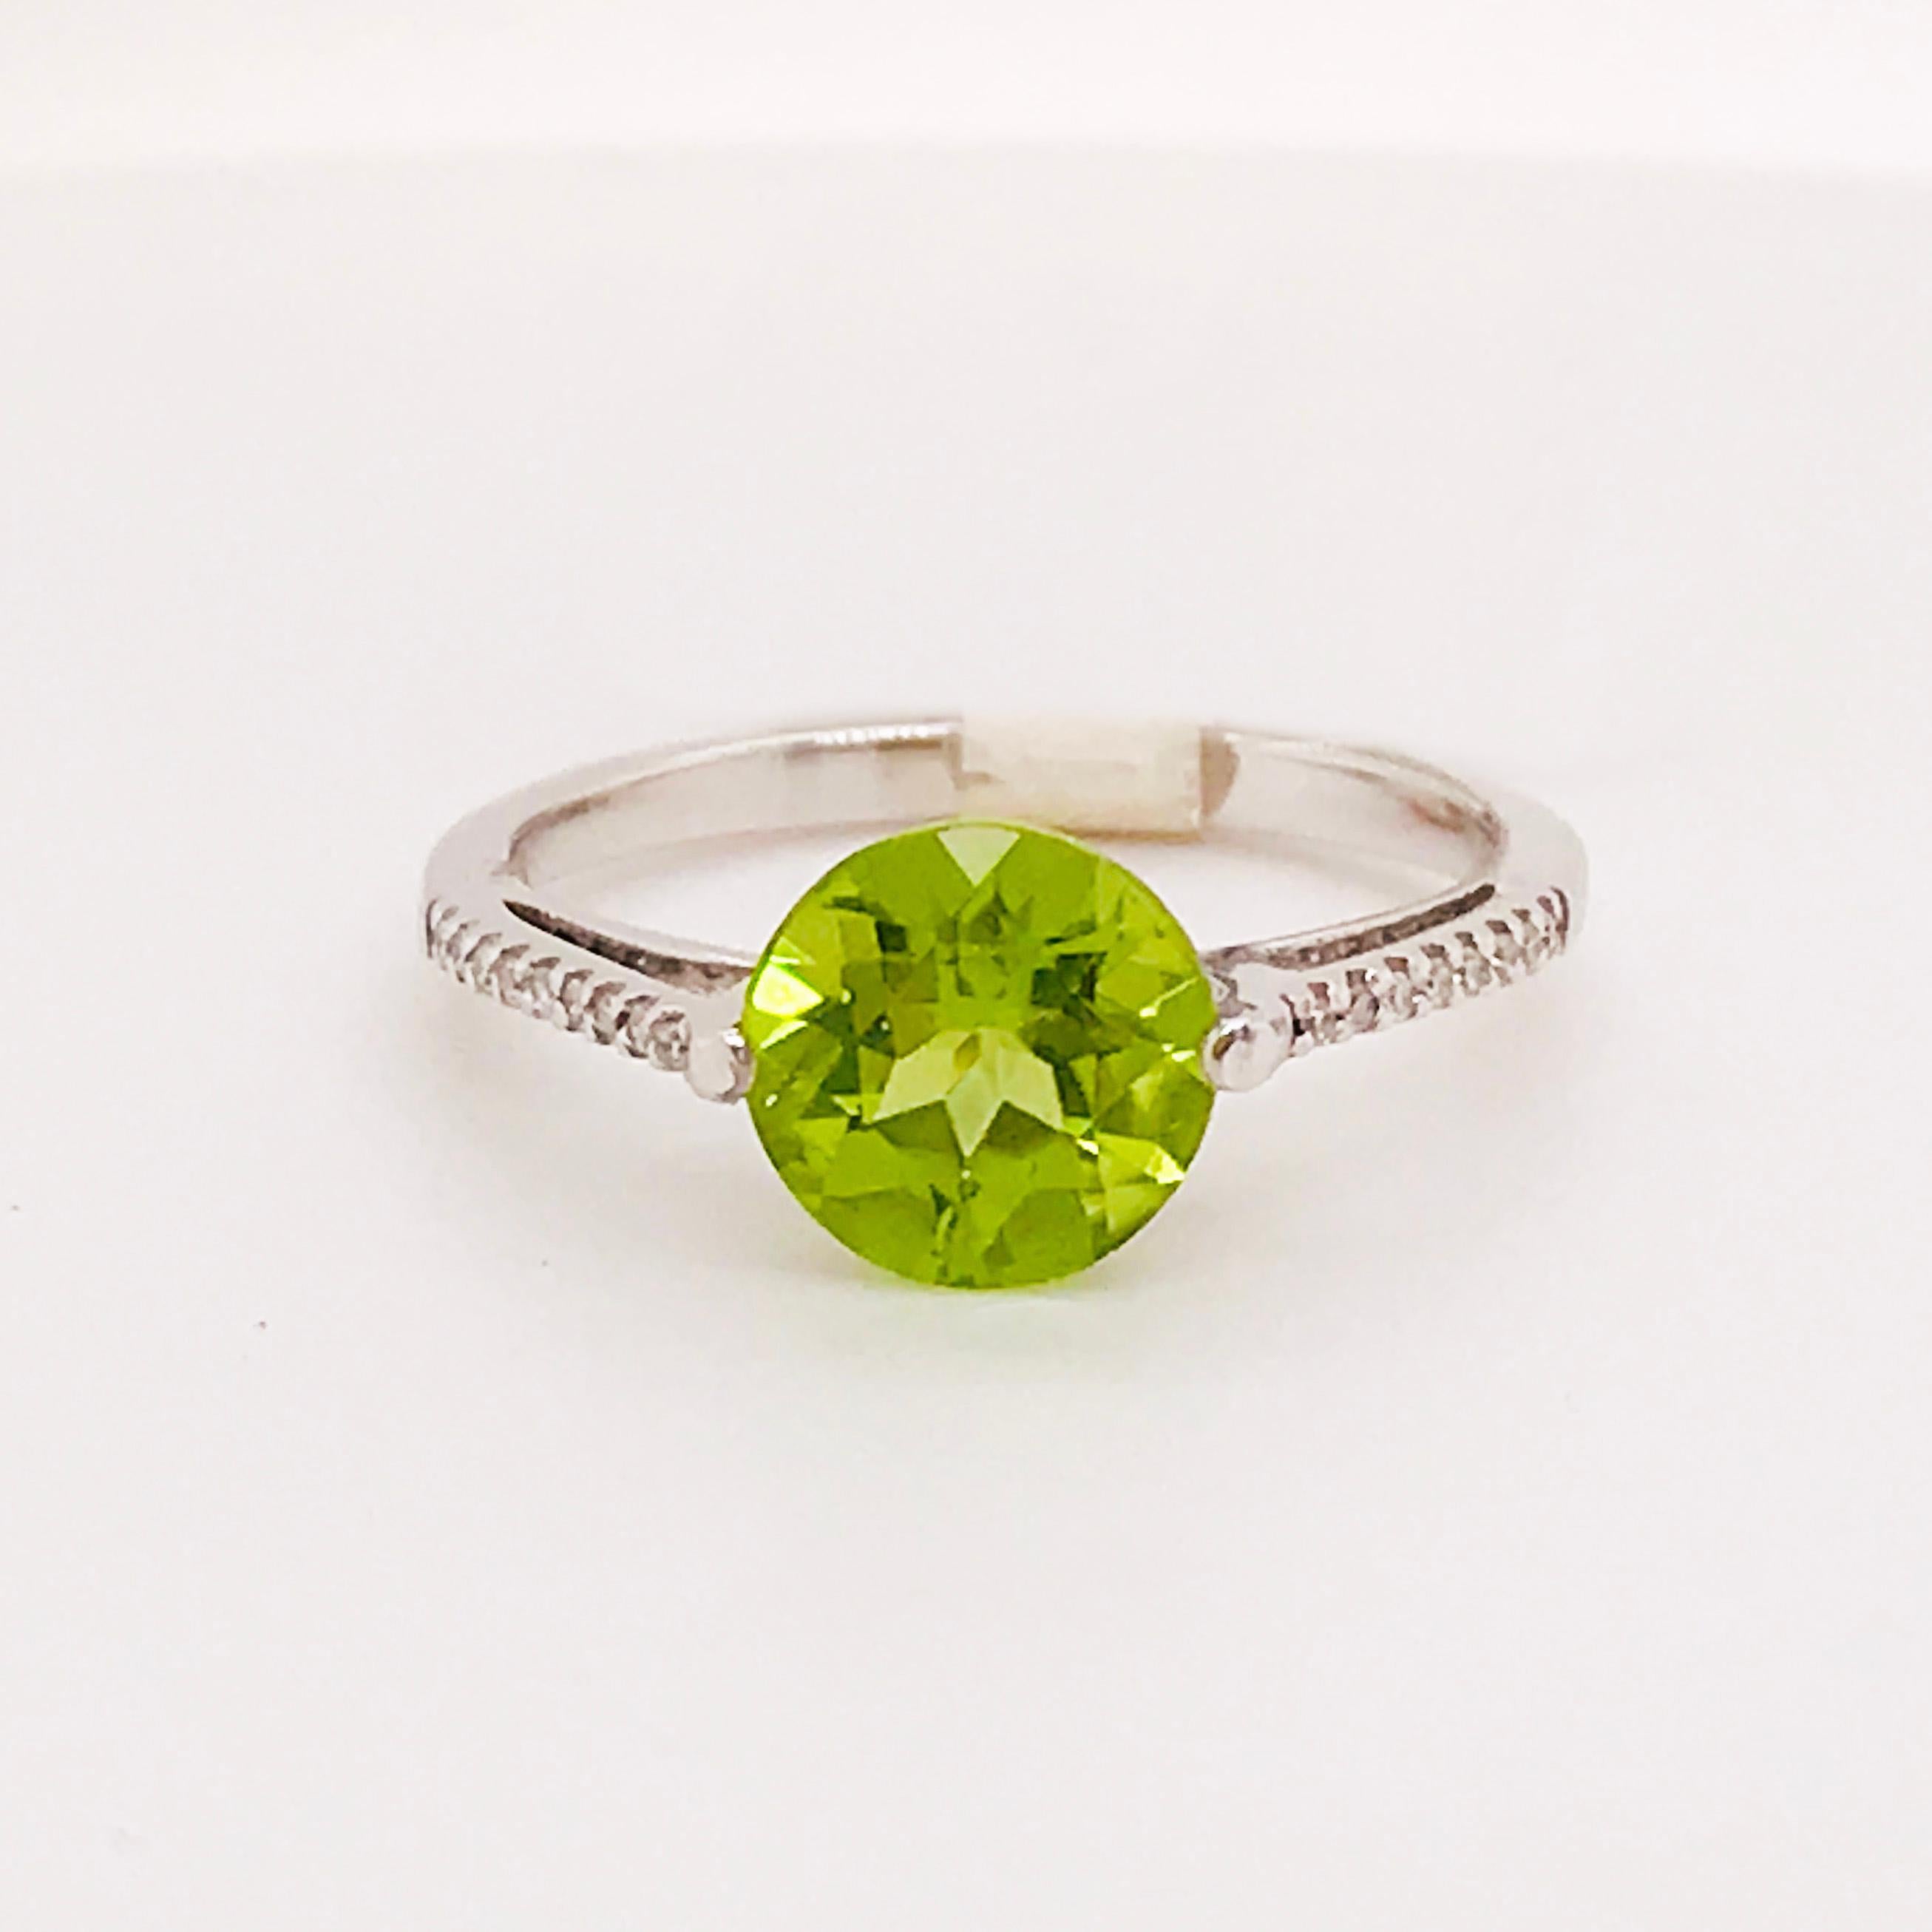 This is a beautiful peridot and diamond ring. With a genuine peridot gemstone set in the center, this peridot has been cut in a round brilliant shape that's been faceted to show the maximum brilliance in the gemstone. The band has round brilliant